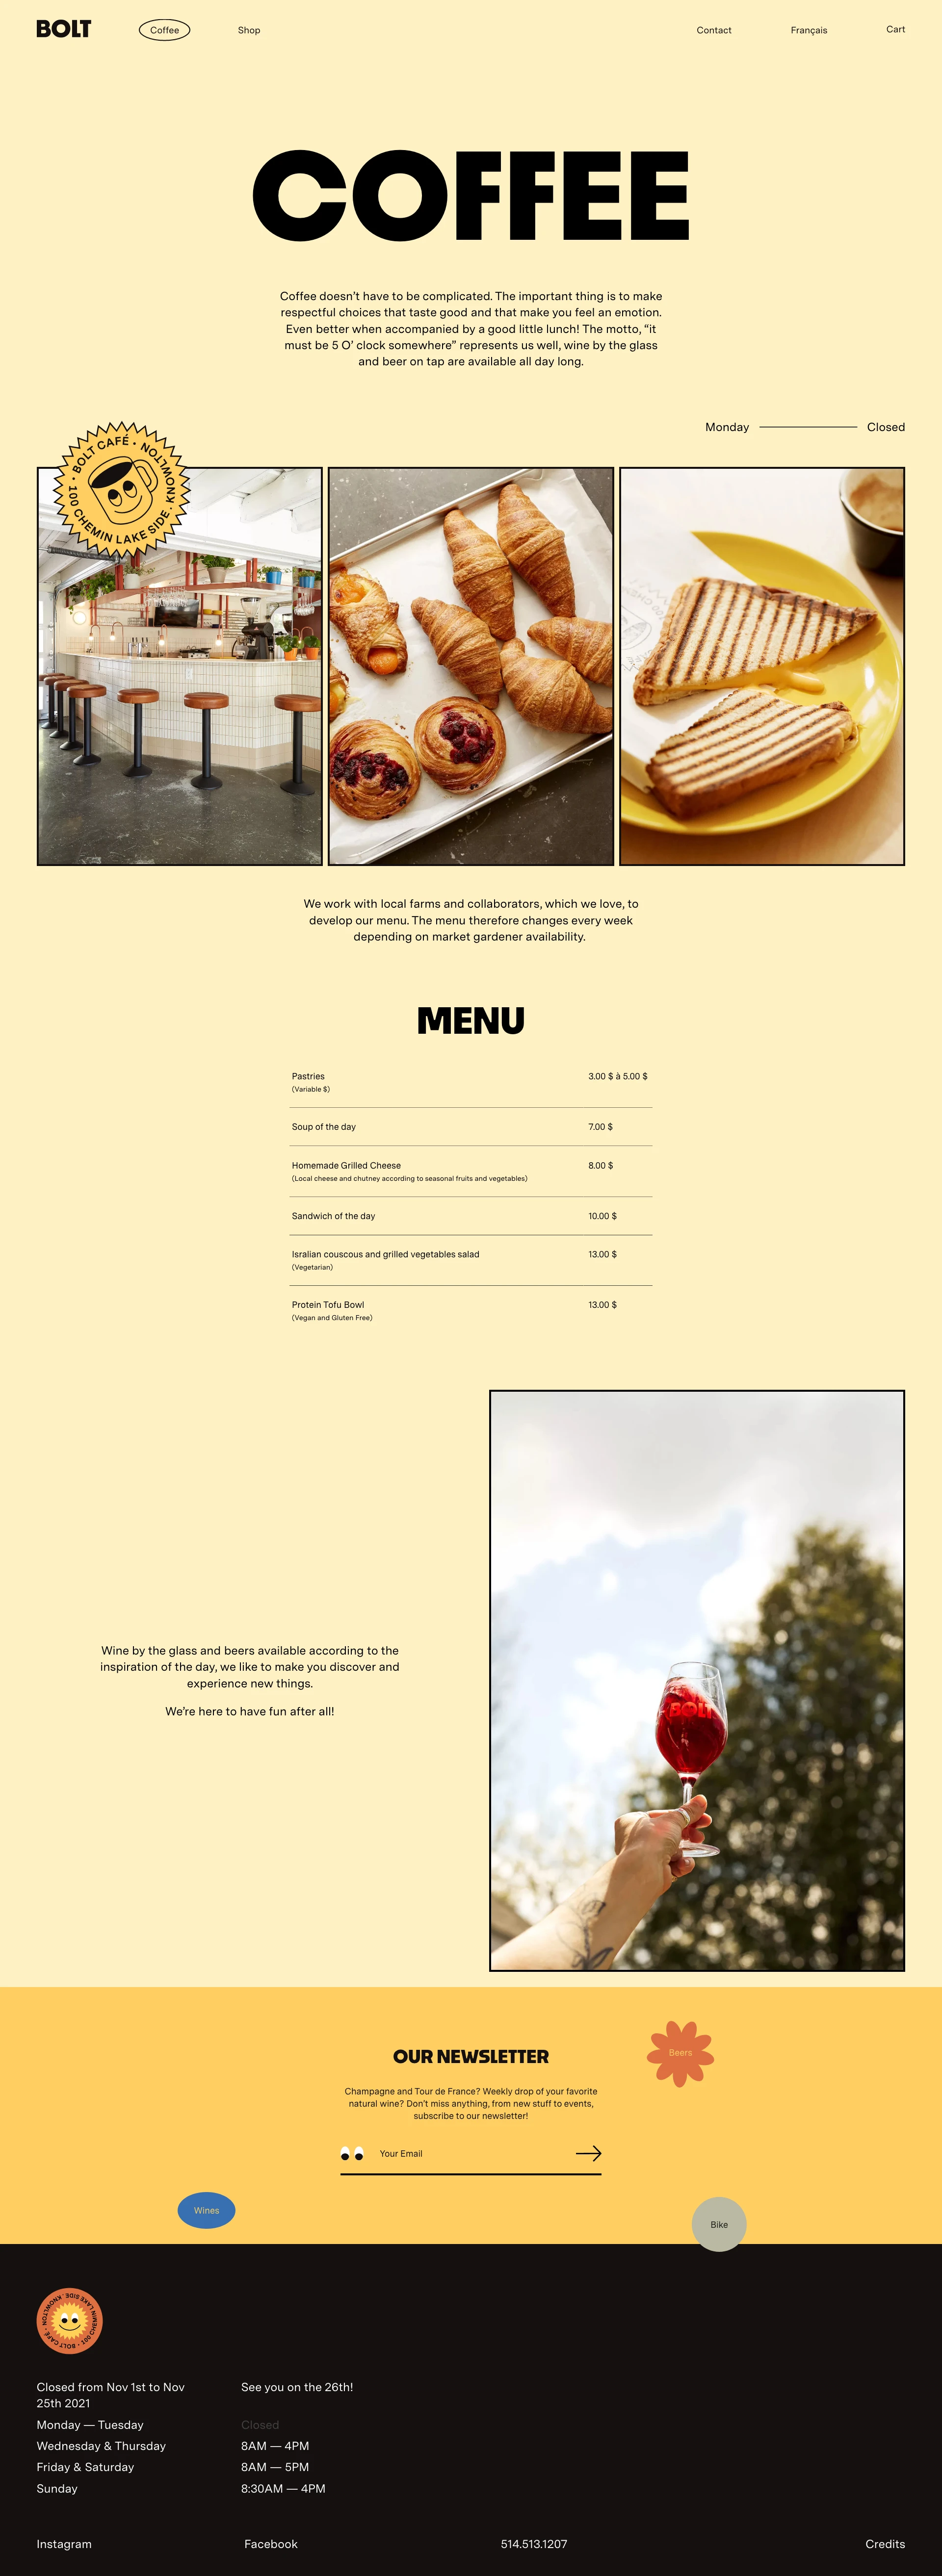 Bolt Café Landing Page Example: Sun is shining ! Delicious lunches, good coffee and excellent wines, say hello to BOLT. A new café-wine bar in the heart of Knowlton.